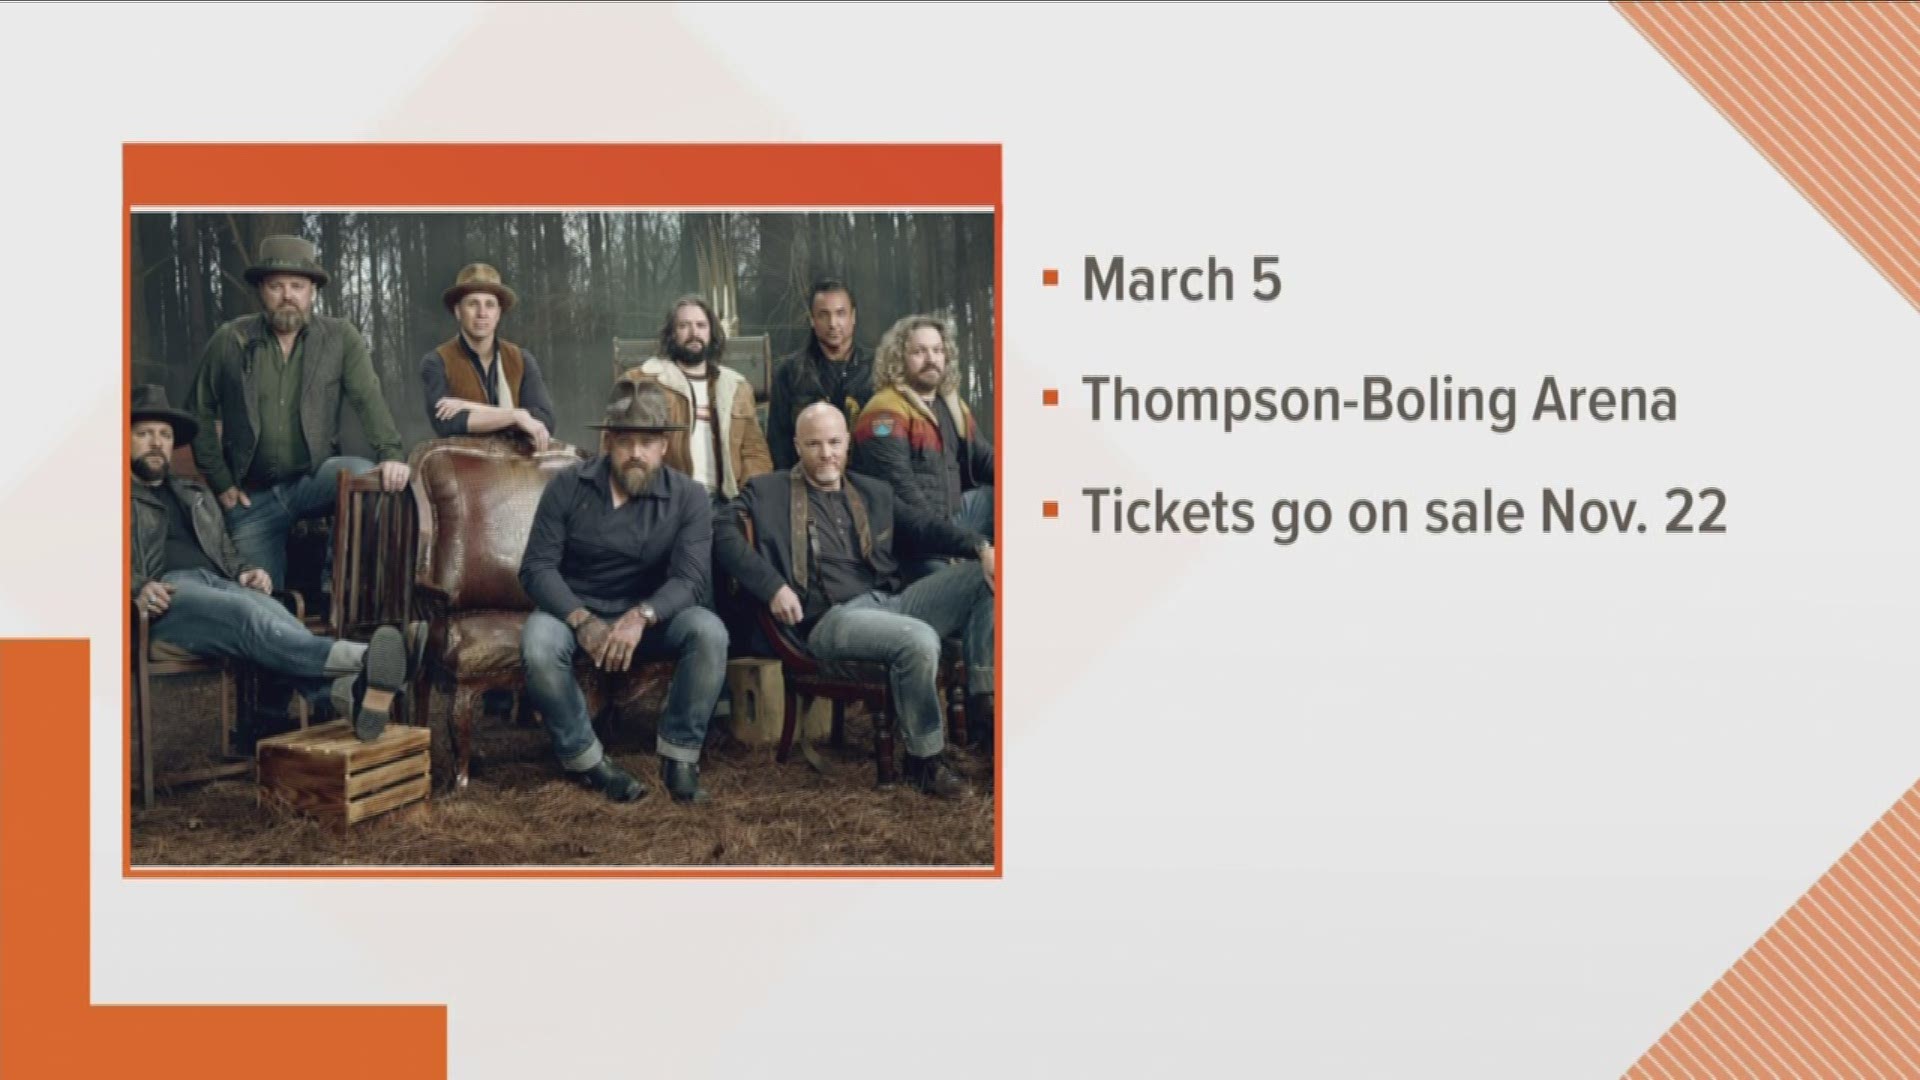 The band will come to Knoxville March 5, 2020 as part of The Owl Tour.